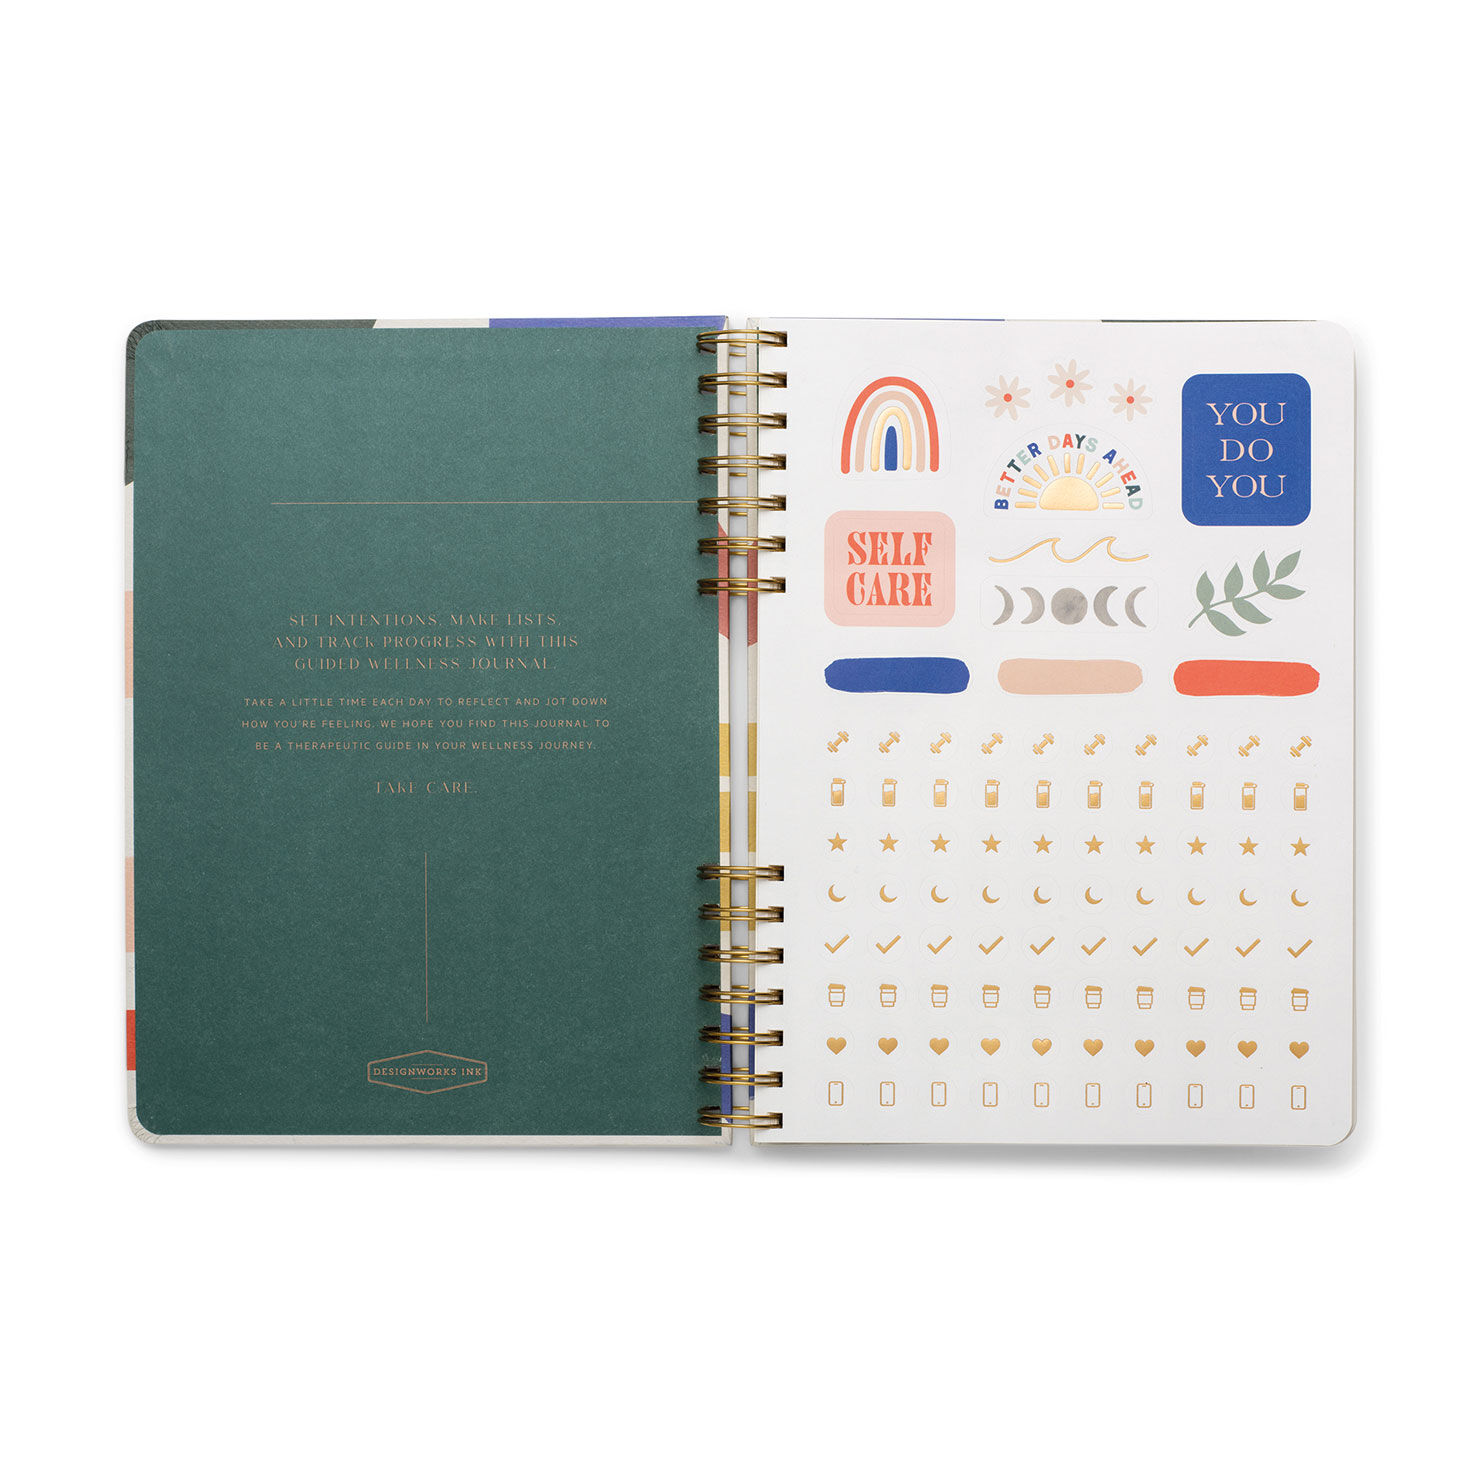 Designworks Ink Come As You Are Guided Wellness Journal for only USD 28.00 | Hallmark